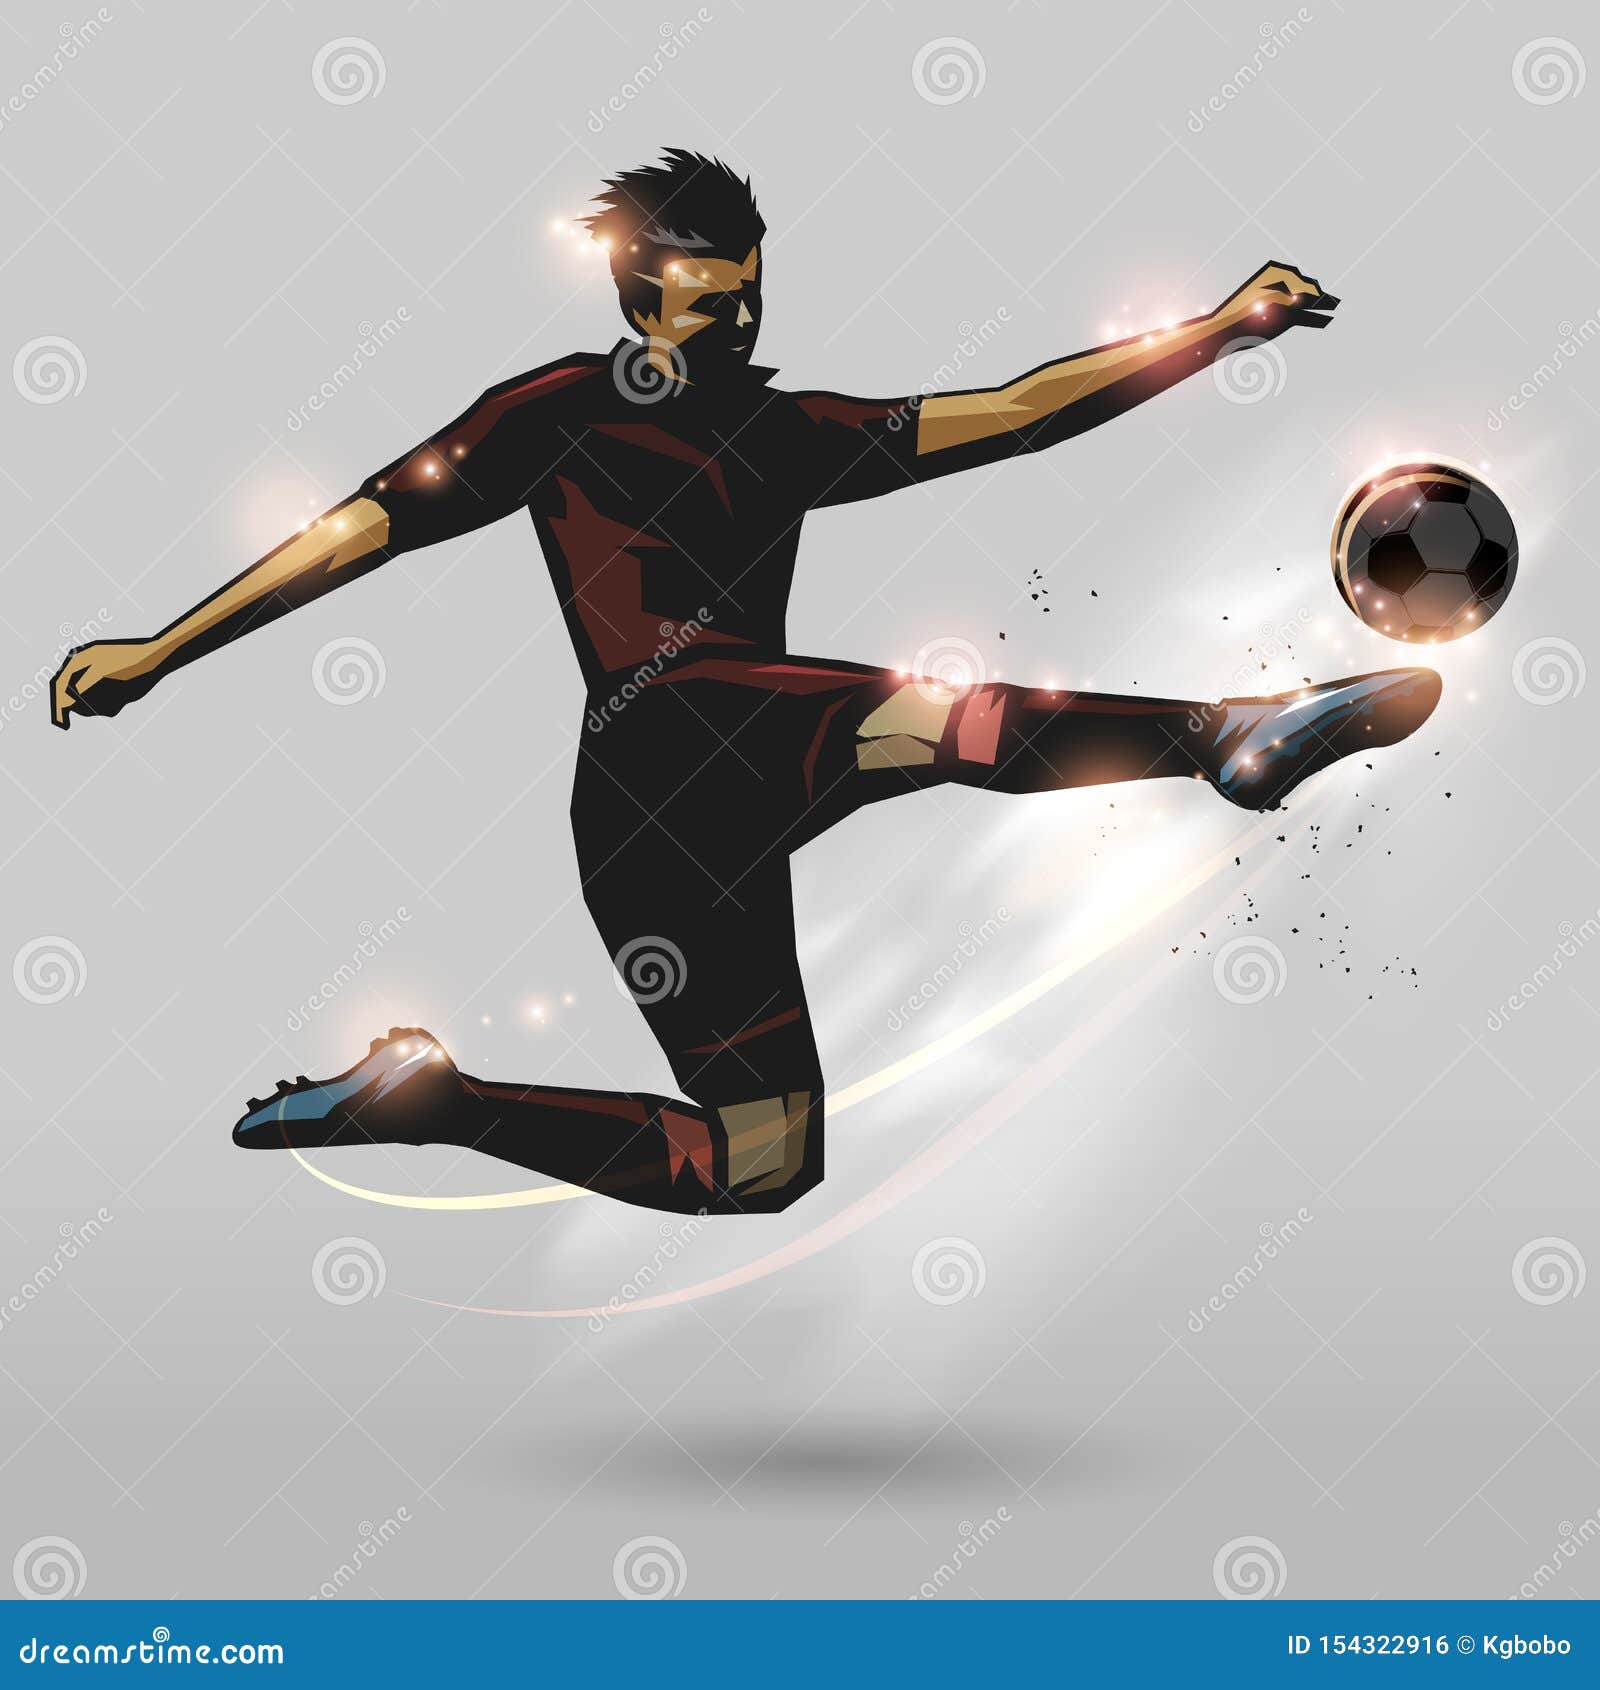 Soccer player half volley stock vector. Illustration of male - 154322916